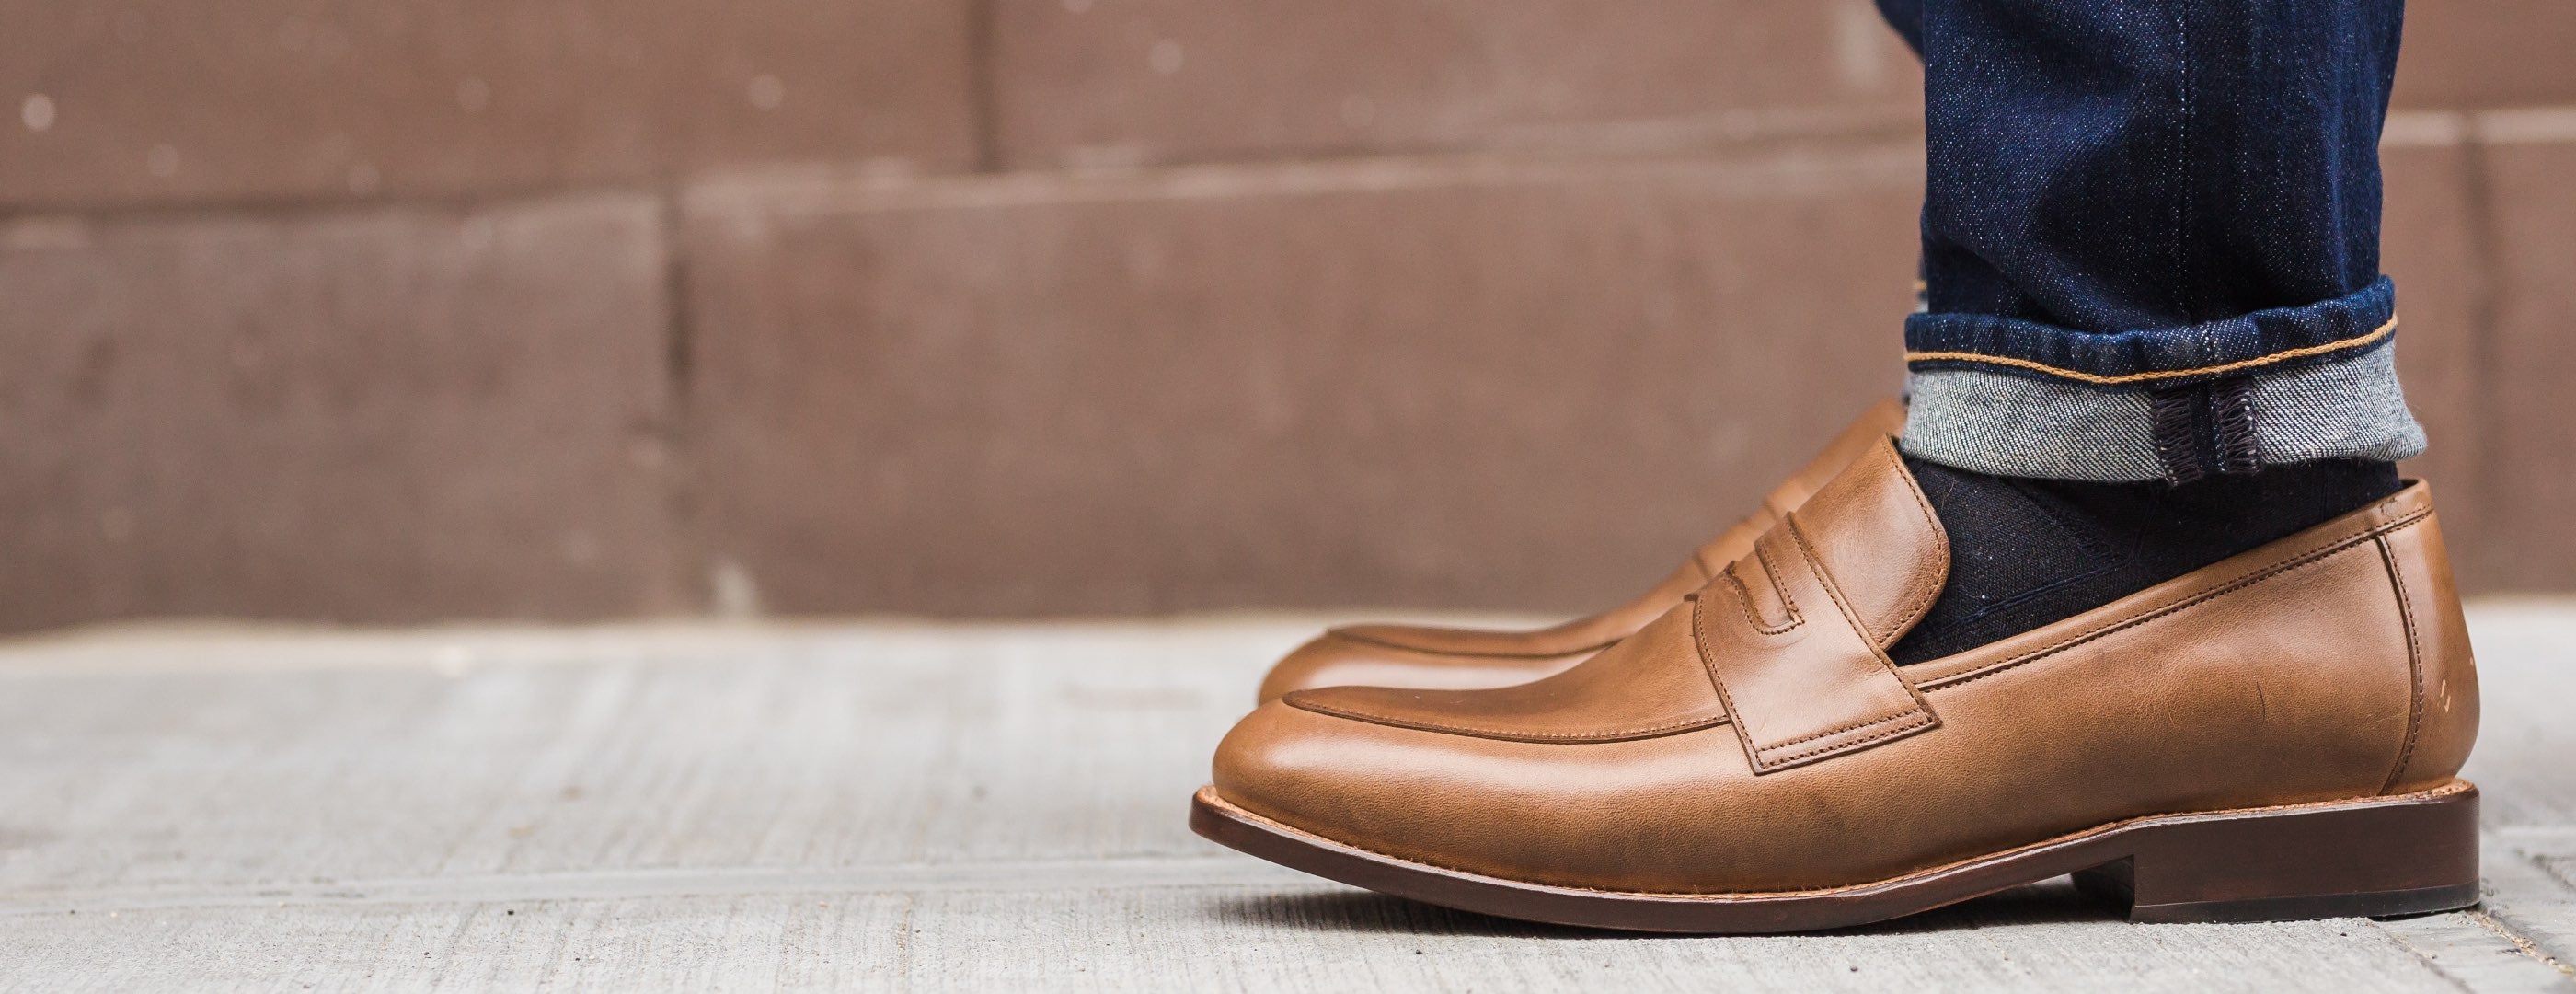 Lincoln Penny Loafer Dress Shoe 